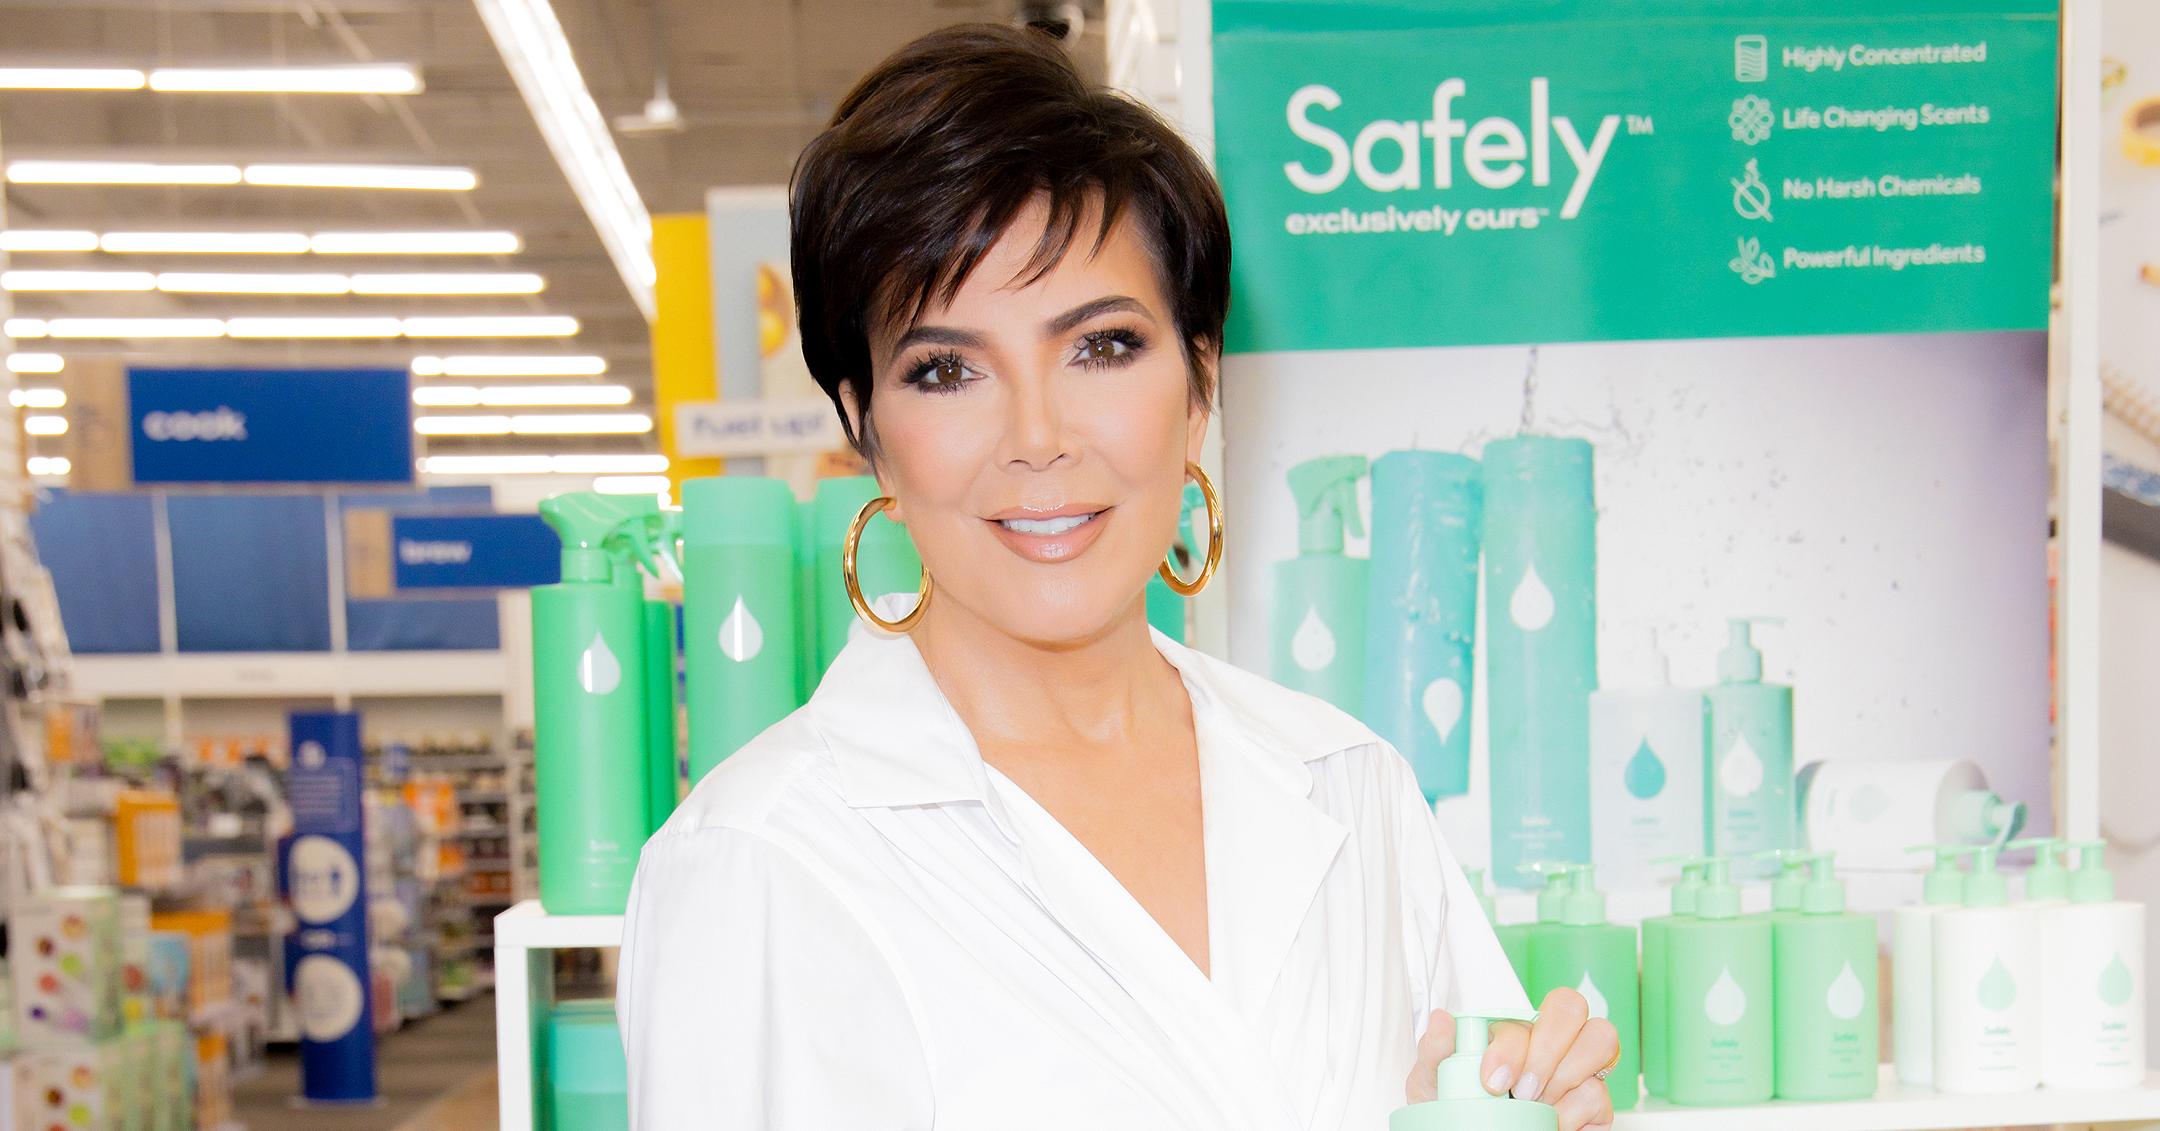 Kris Jenner's Cleaning Line Safely Releases Dish Washing Collection